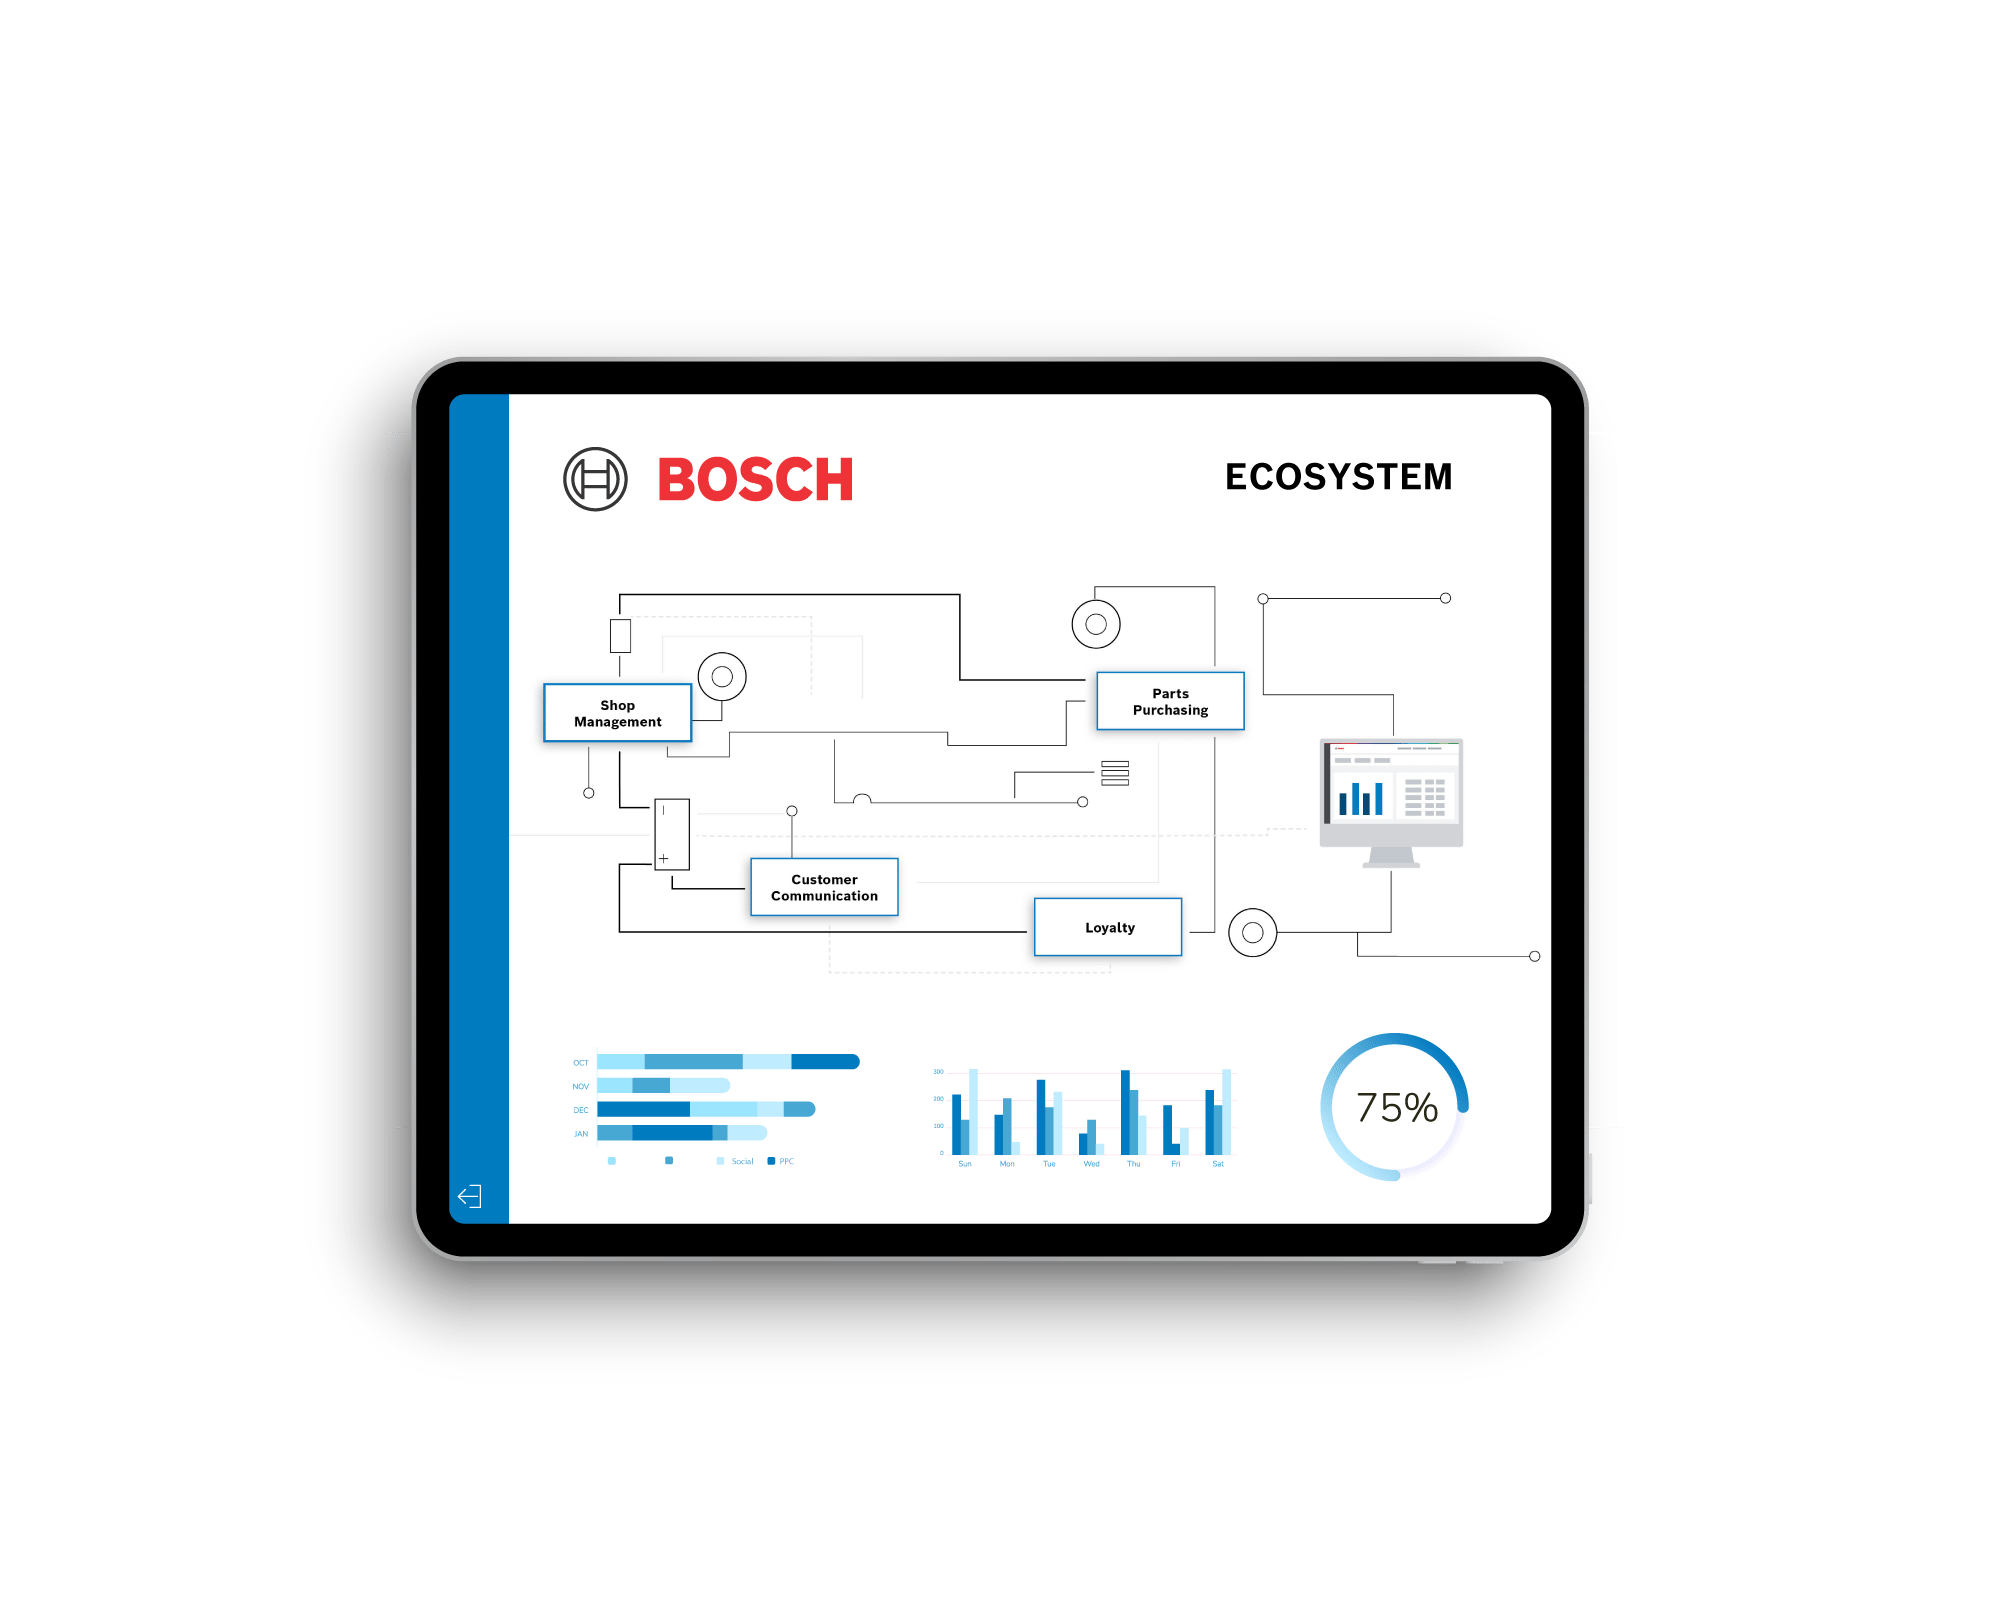 Bosch Auto Service up-to-date technology allows your shop to run at peak performance. 